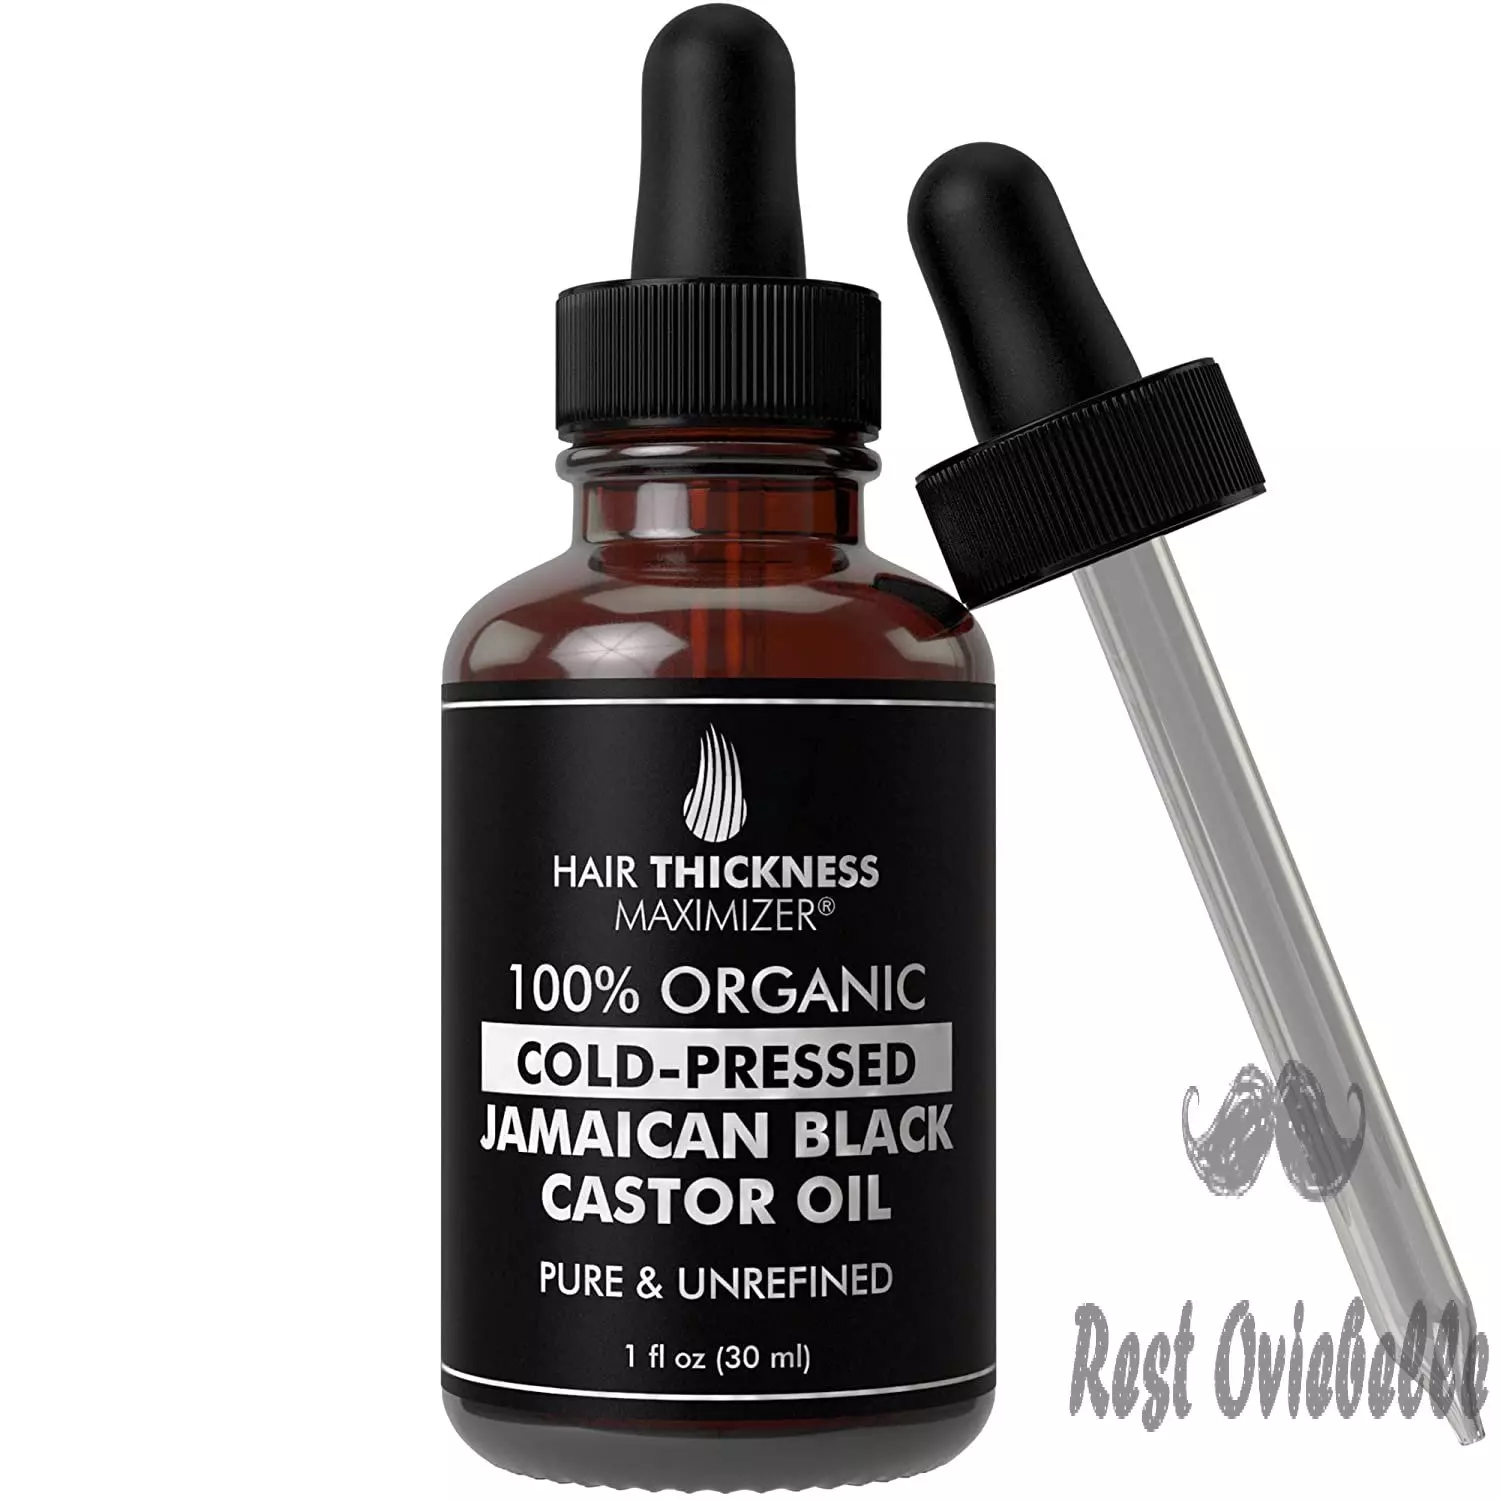 Hair Thickness Maximizer 100% Cold-Pressed Jamaican Black Castor Oil